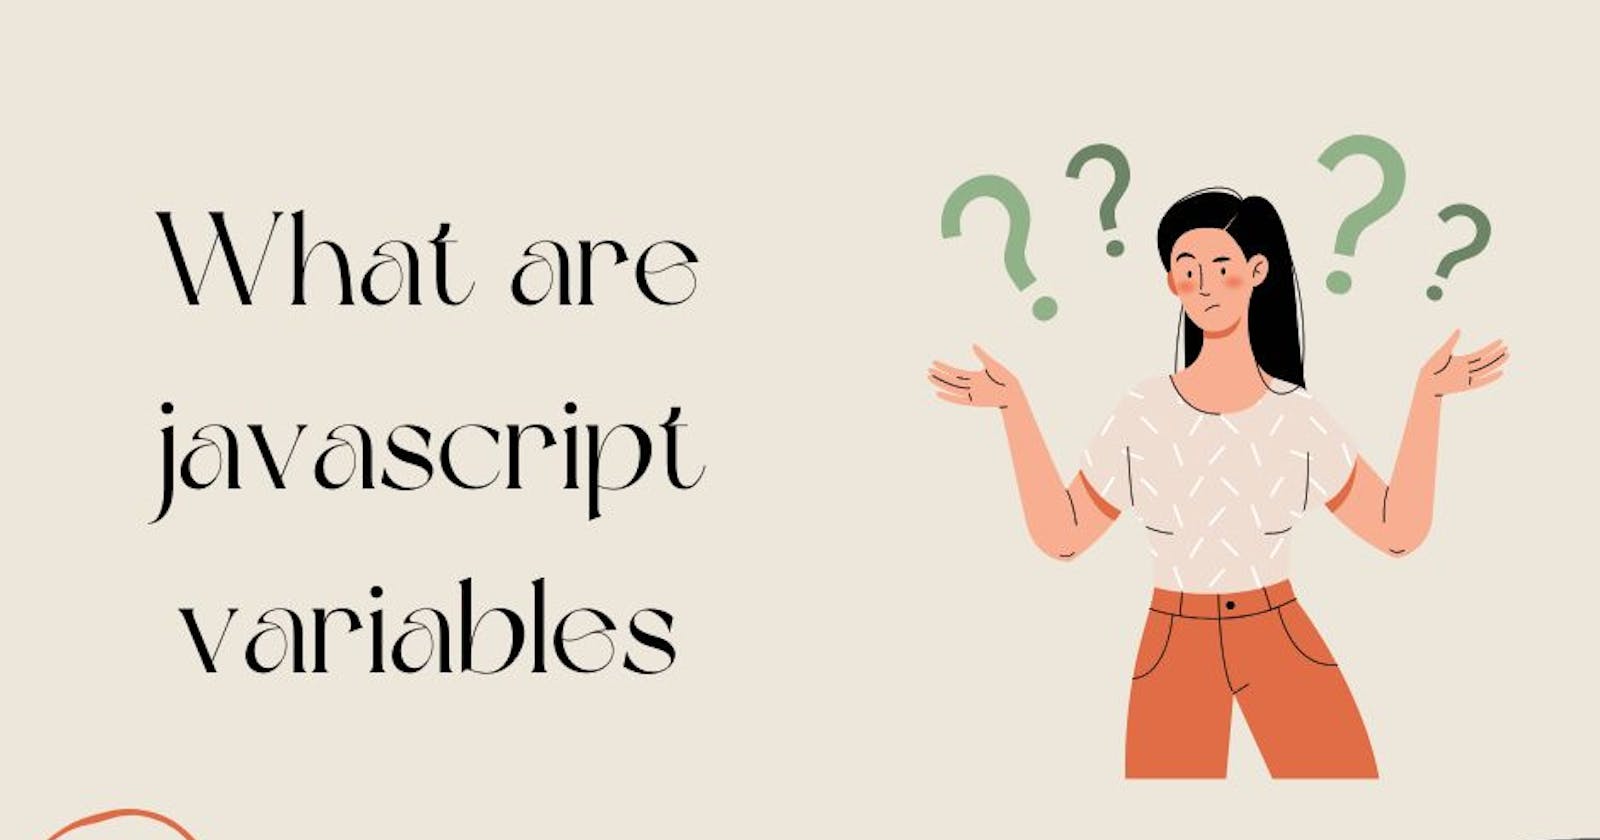 What Are Javascript Variables?